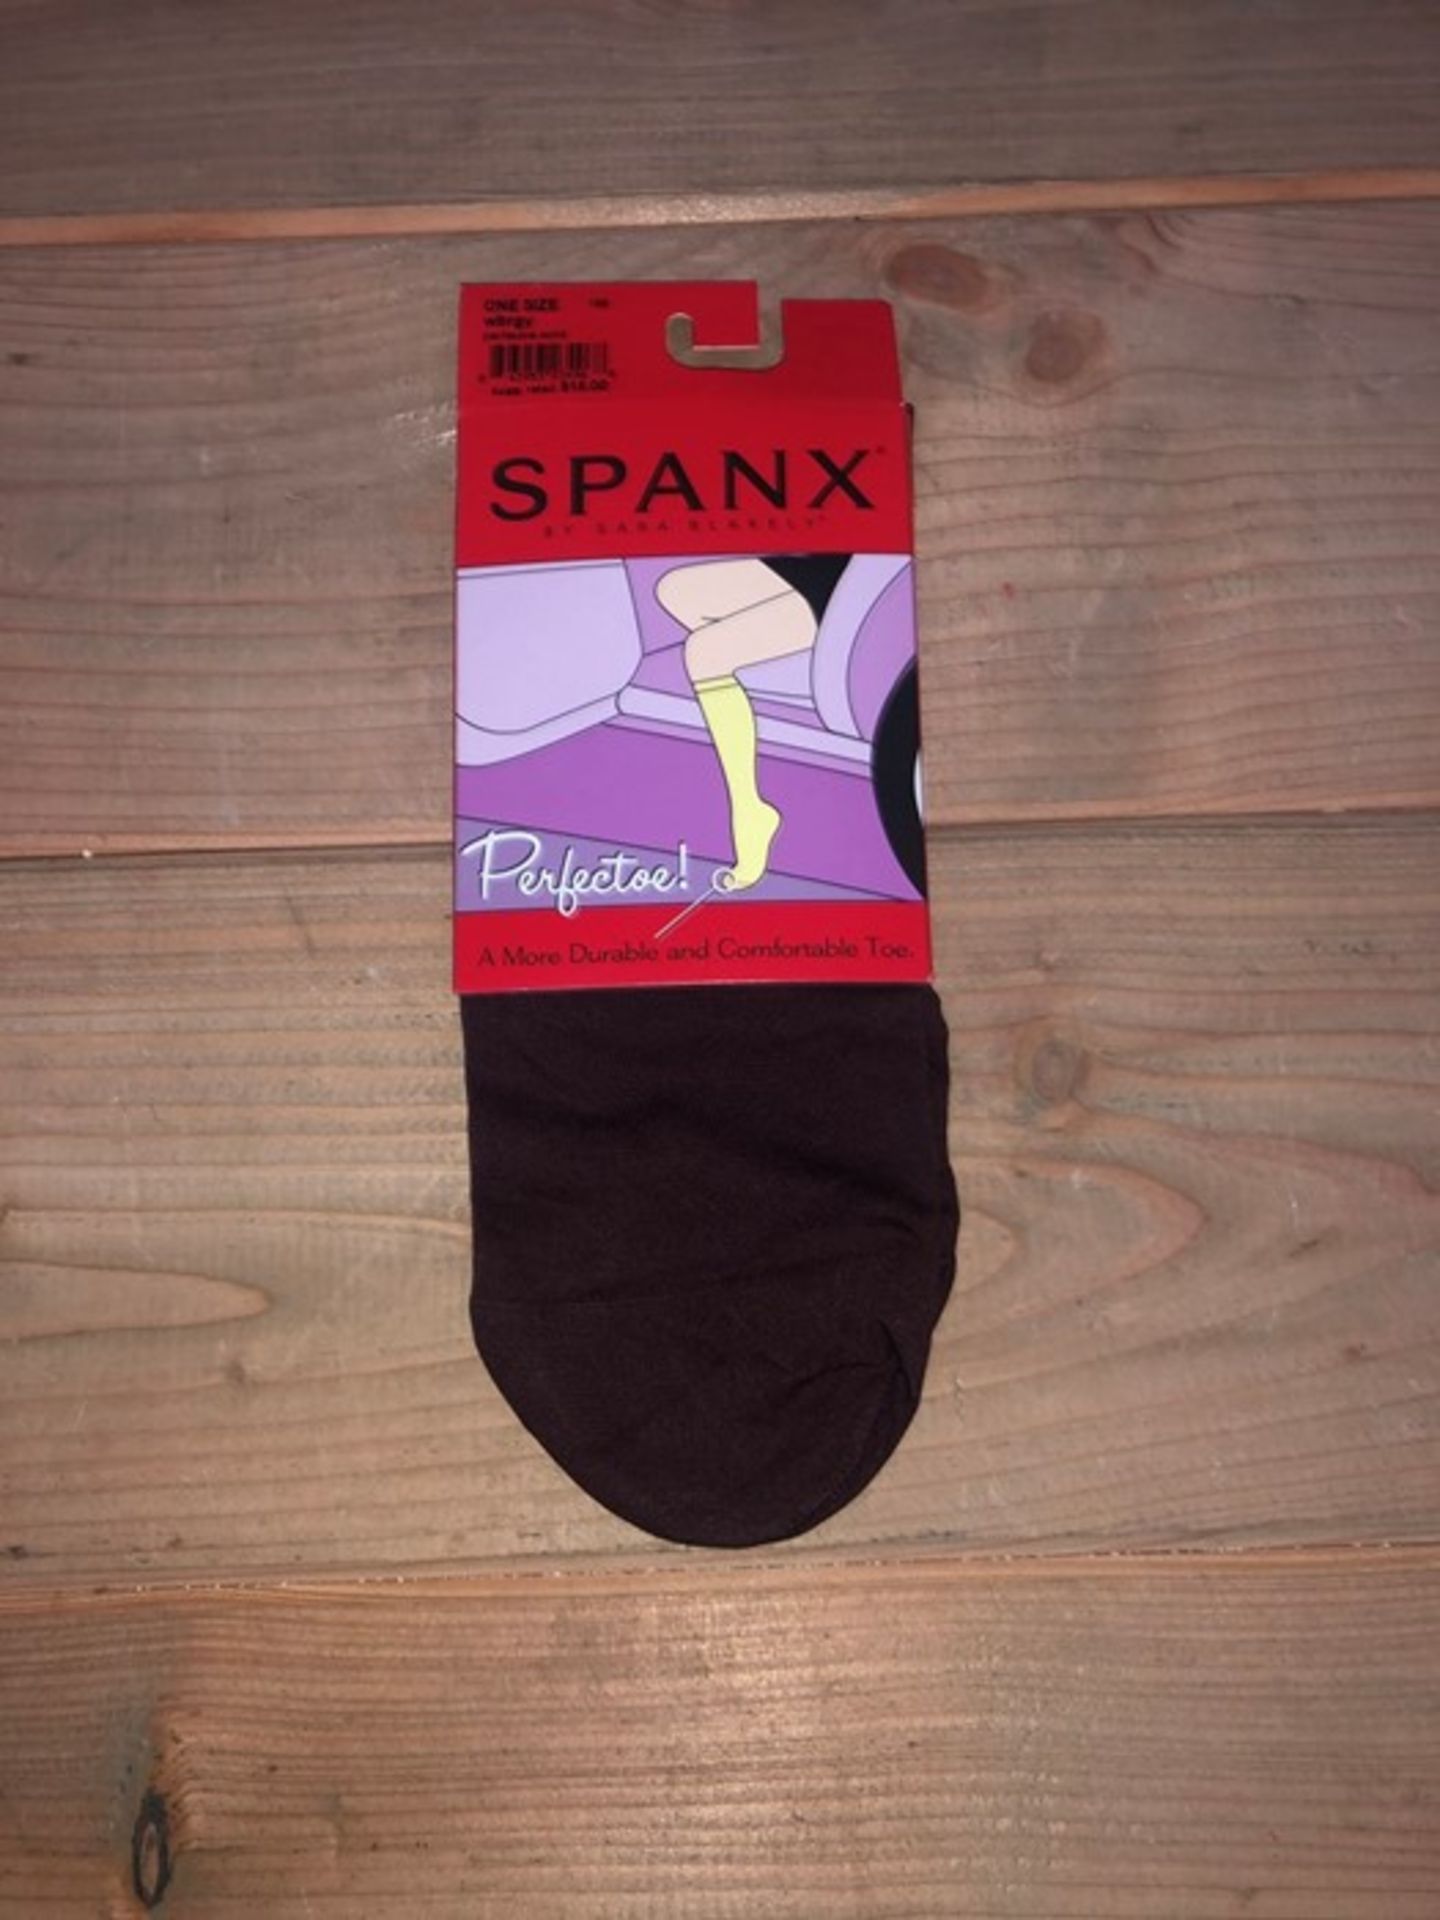 1 LOT TO CONTAIN 50 SPANX SOCKS IN BURGUNDY / SIZE ONE SIZE / STYLE 105 / RRP £750.00 (PUBLIC